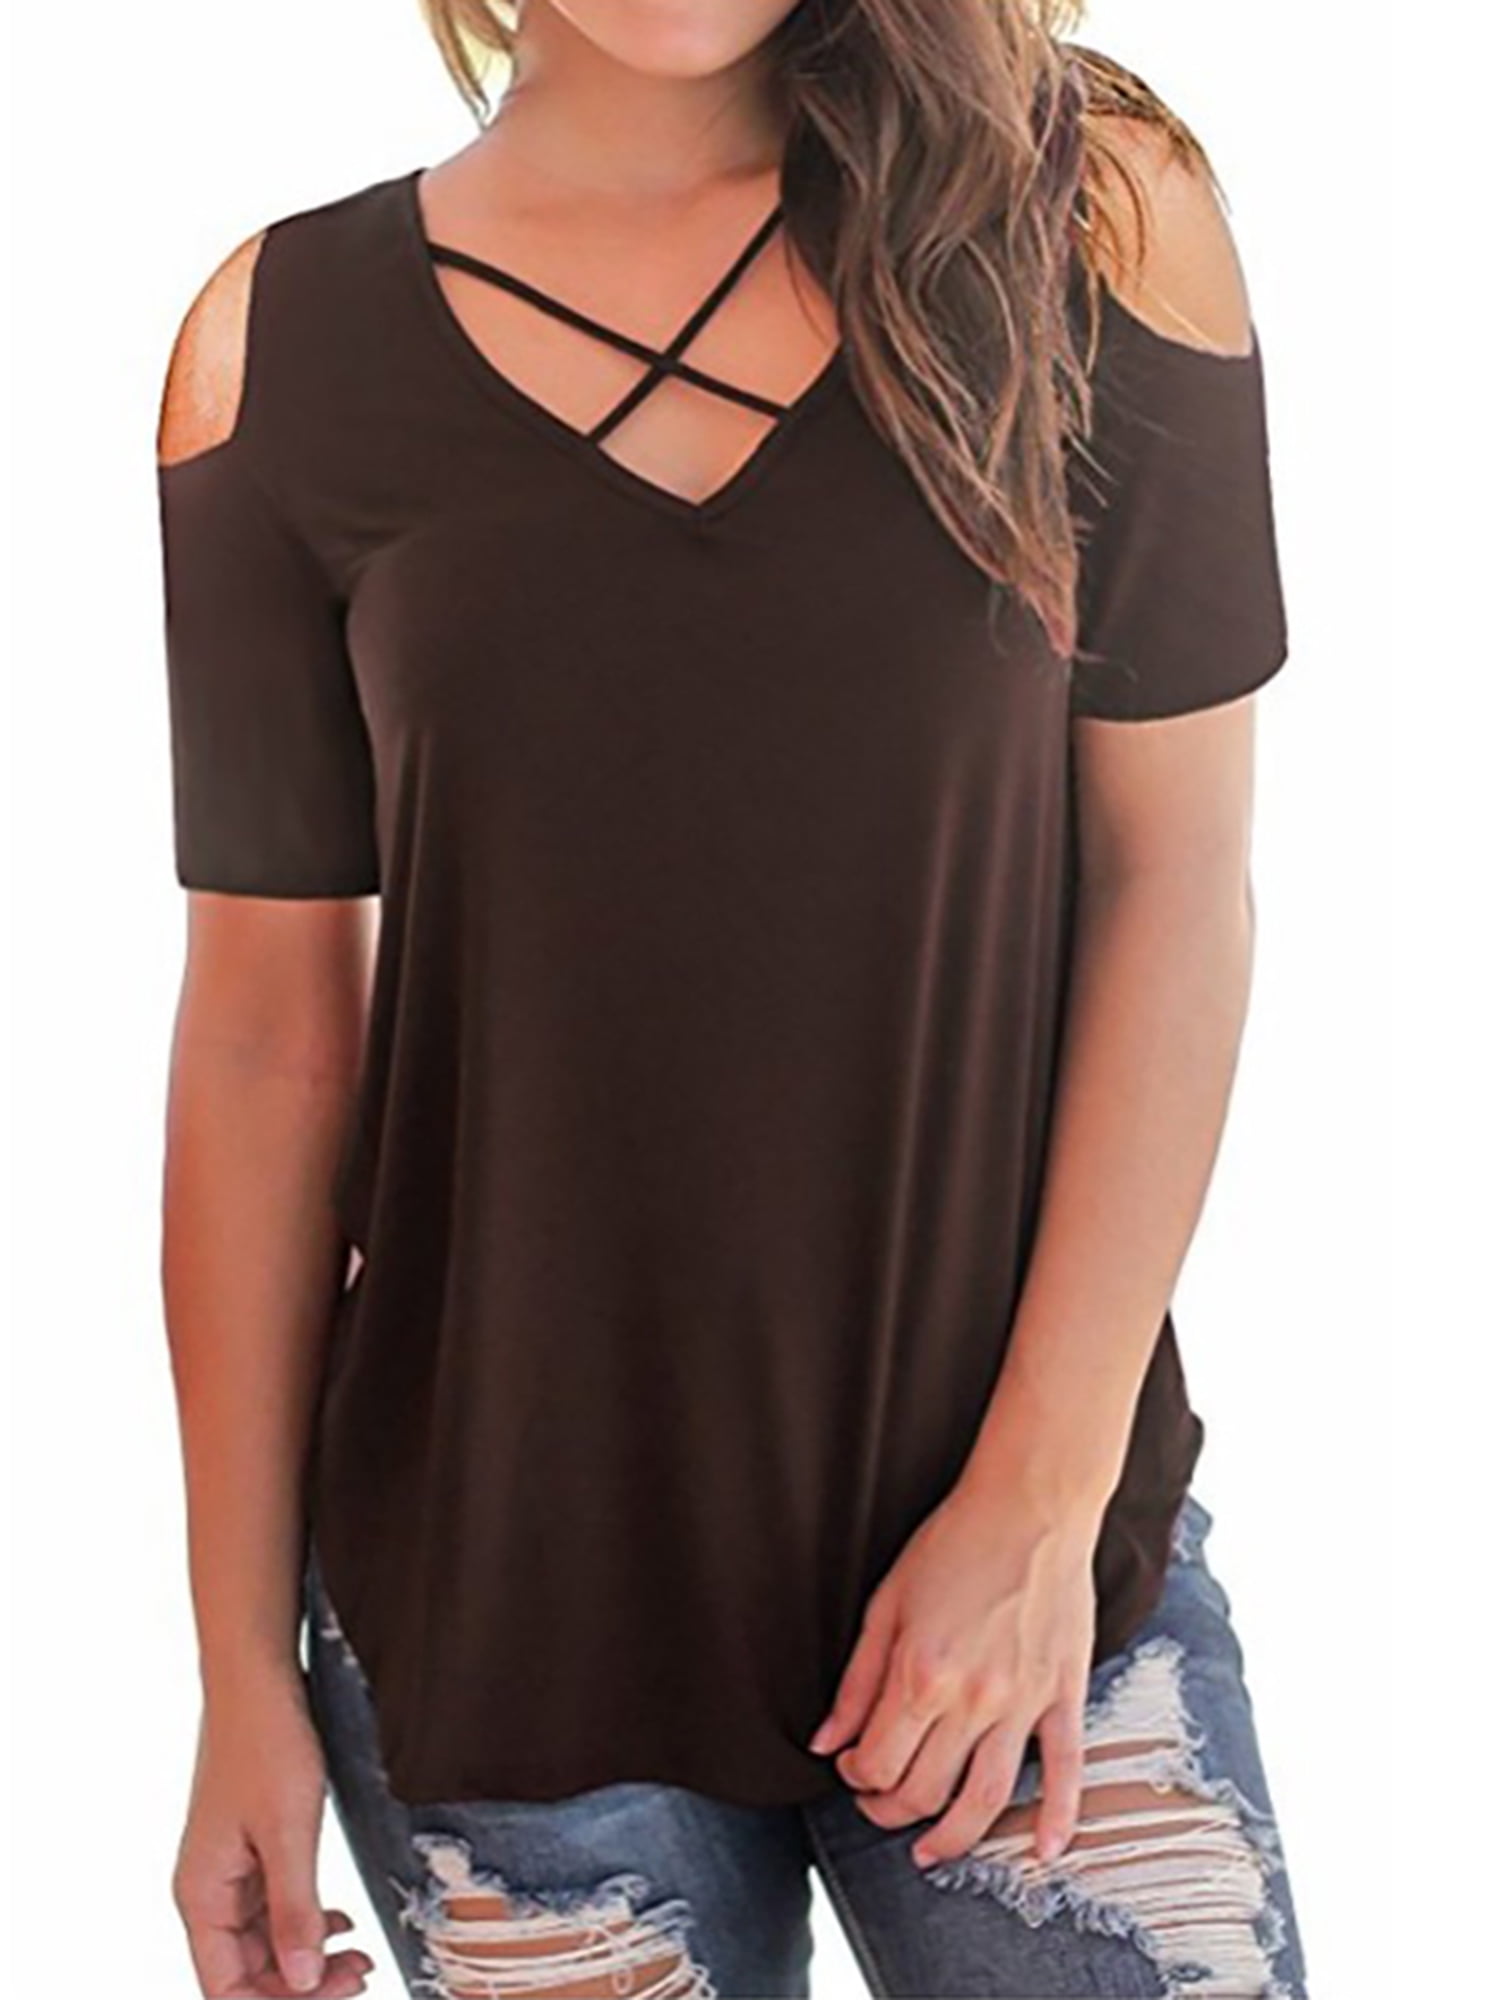 Women's Cold Shoulder Strappy Tunic Tops Loose Zipper V-Neck Tee Summer Casual T-Shirt Fashion Blouses